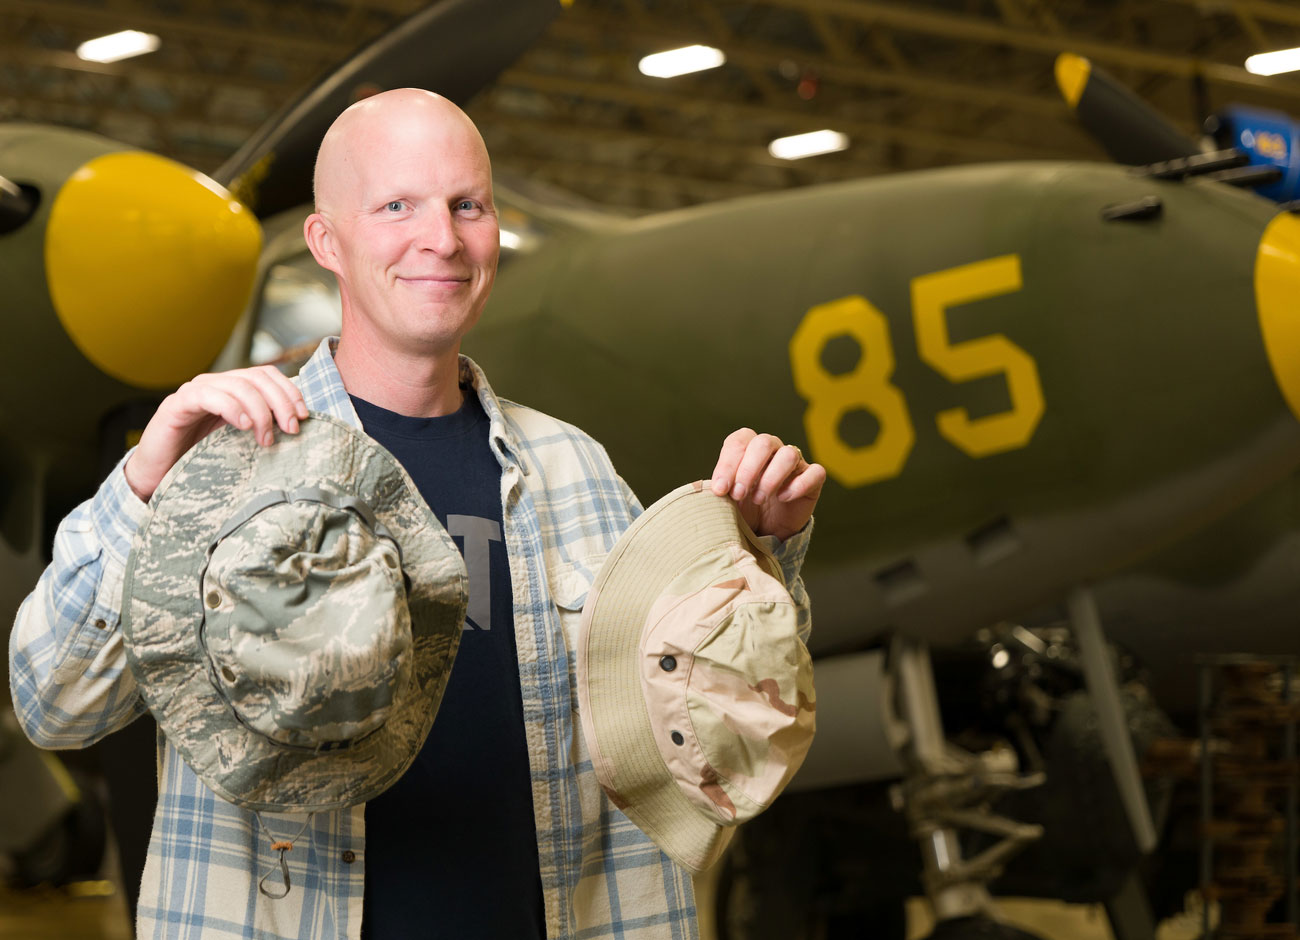 a man holds two camouflage hats from the War in Iraq. Behind him is a green airplane with the number 85 painted on the side.